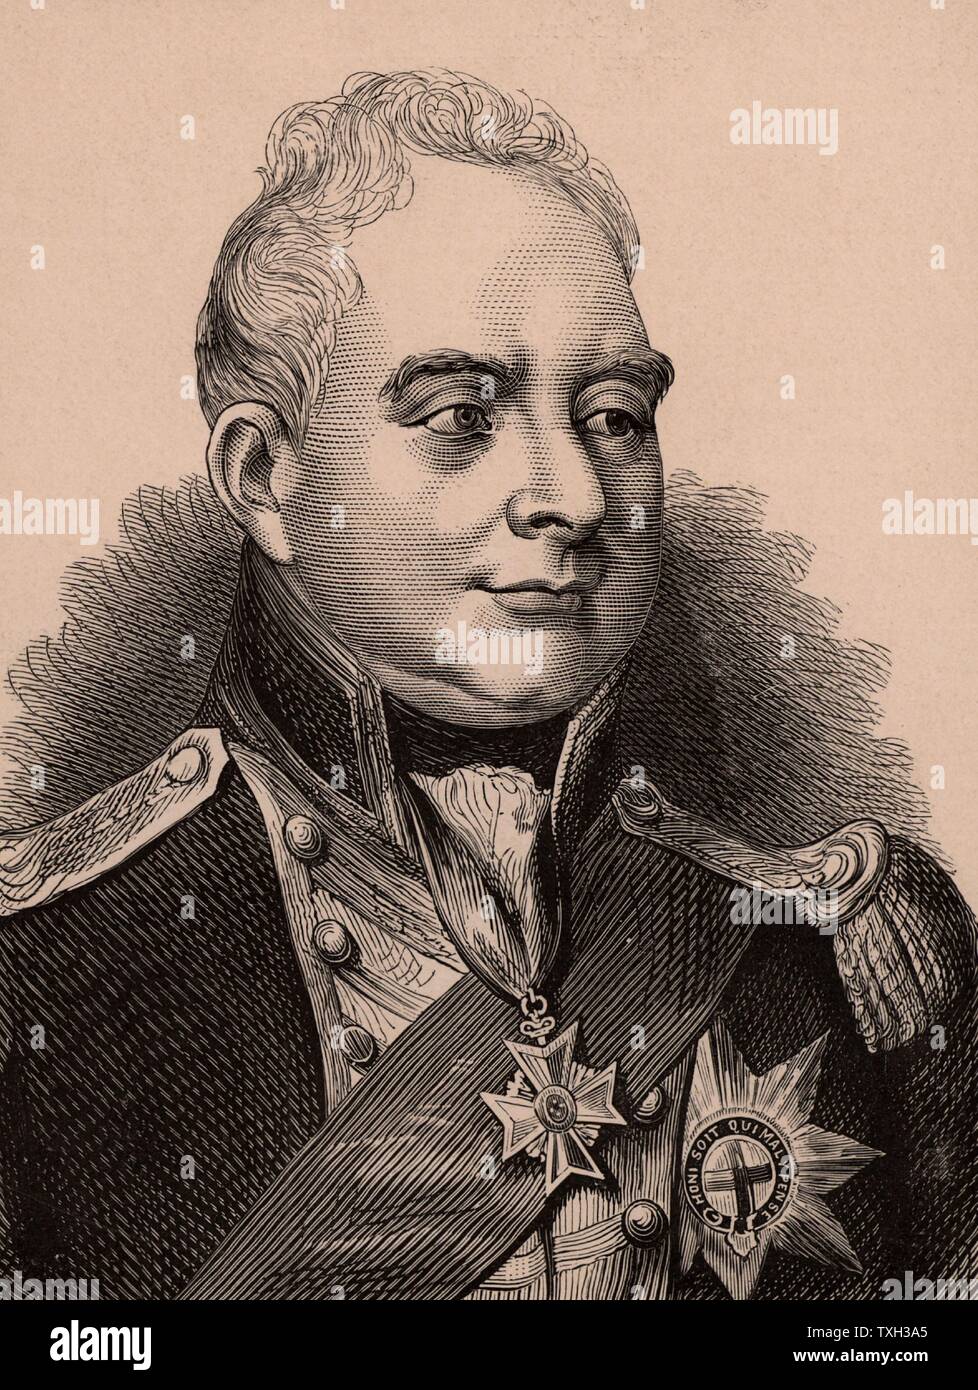 William IV (1765-1837) king of Great Britain from 1830; third son of George III, uncle of Victoria.  Member of the Hanoverian dynasty. Wood engraving c1900. Stock Photo